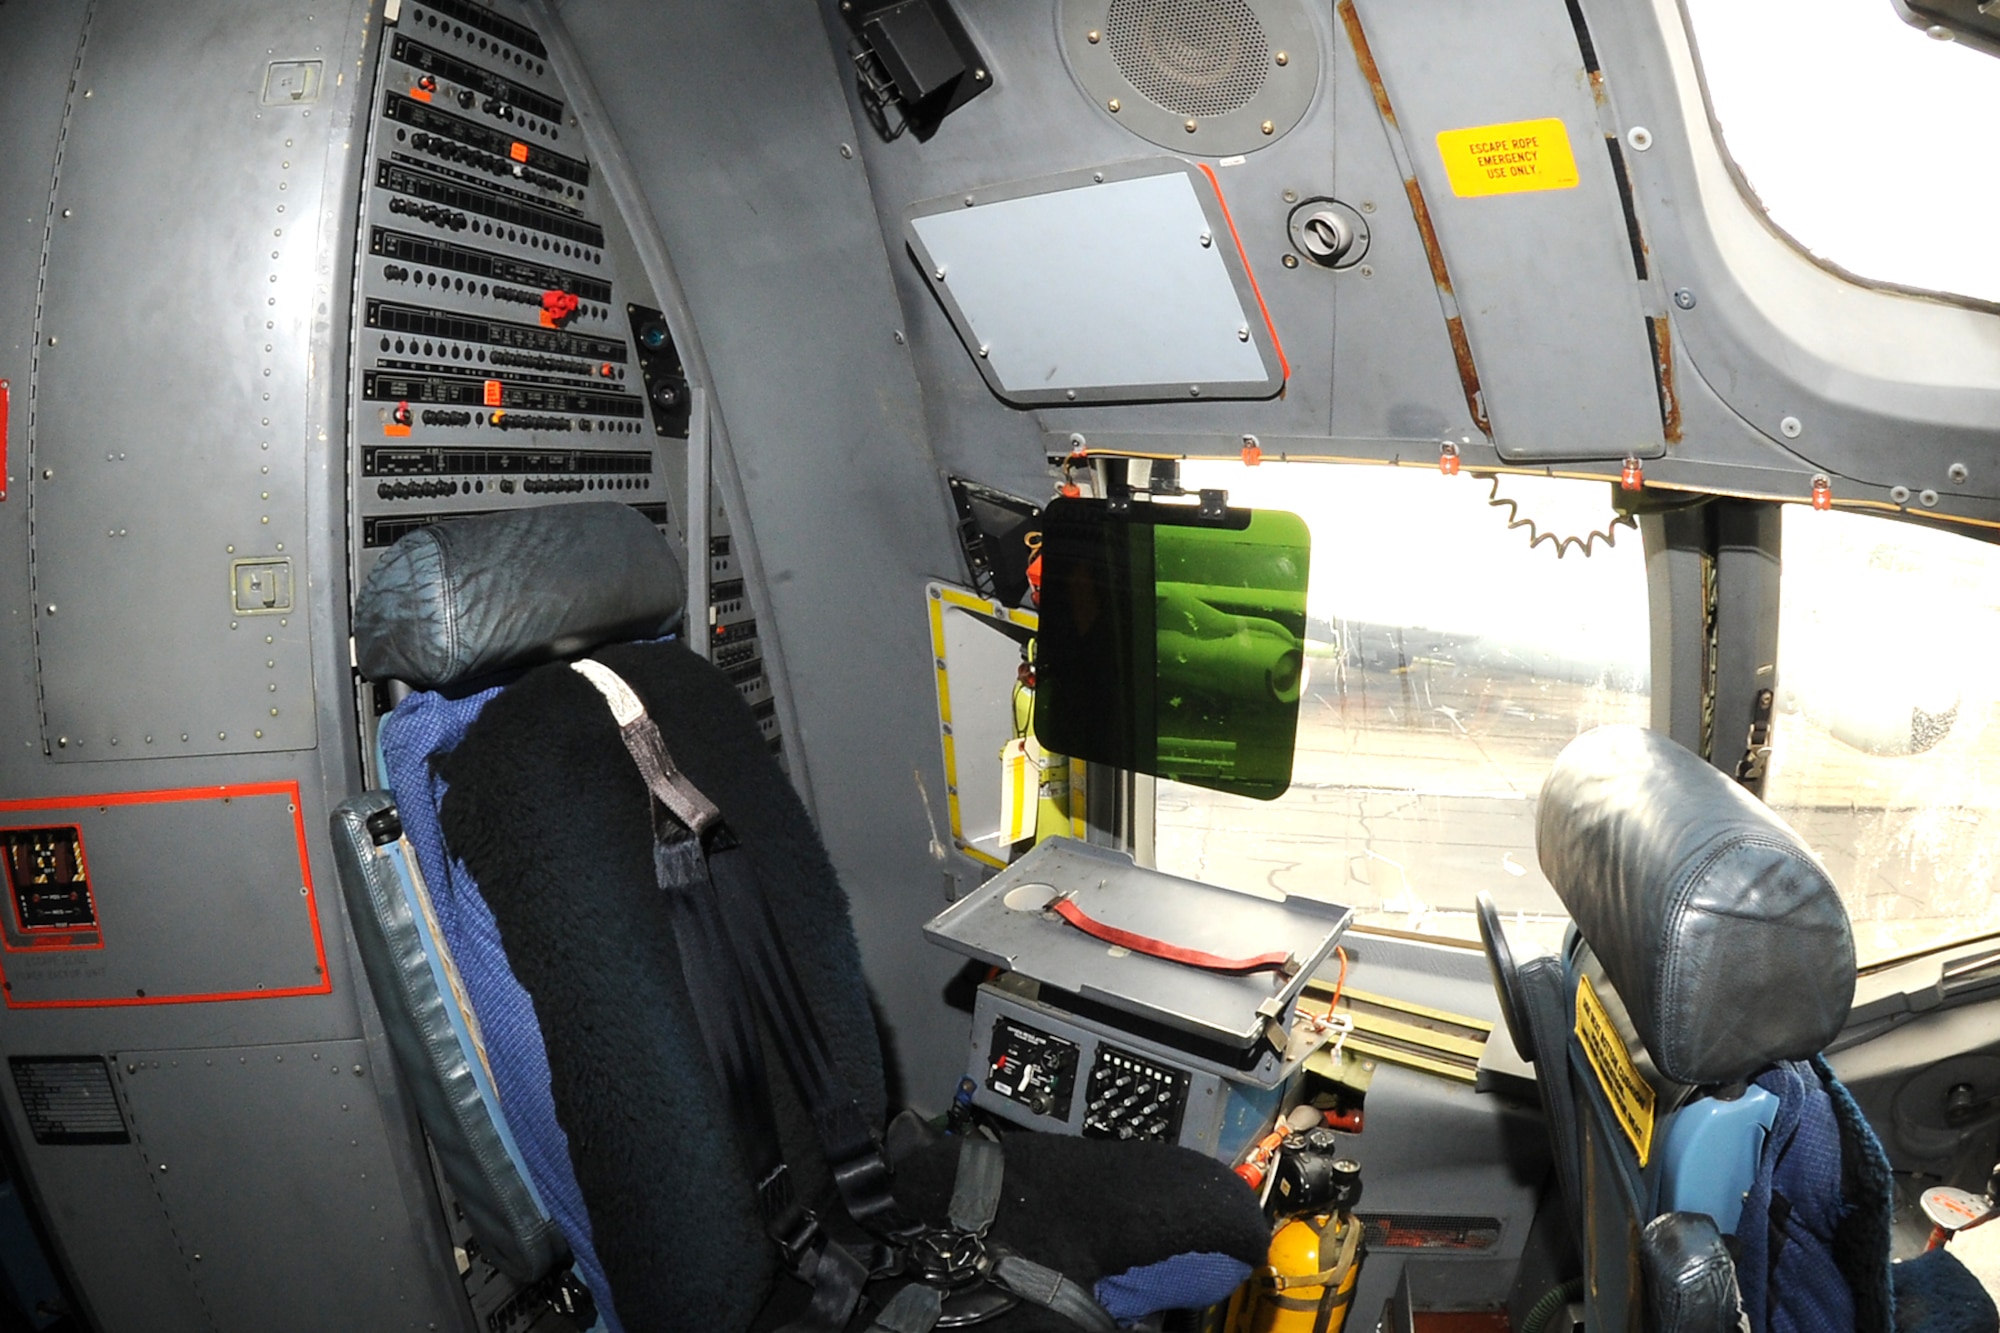 DAYTON, Ohio - Boeing C-17 cockpit at the National Museum of the U.S. Air Force. (U.S. Air Force photo by Ken LaRock)
